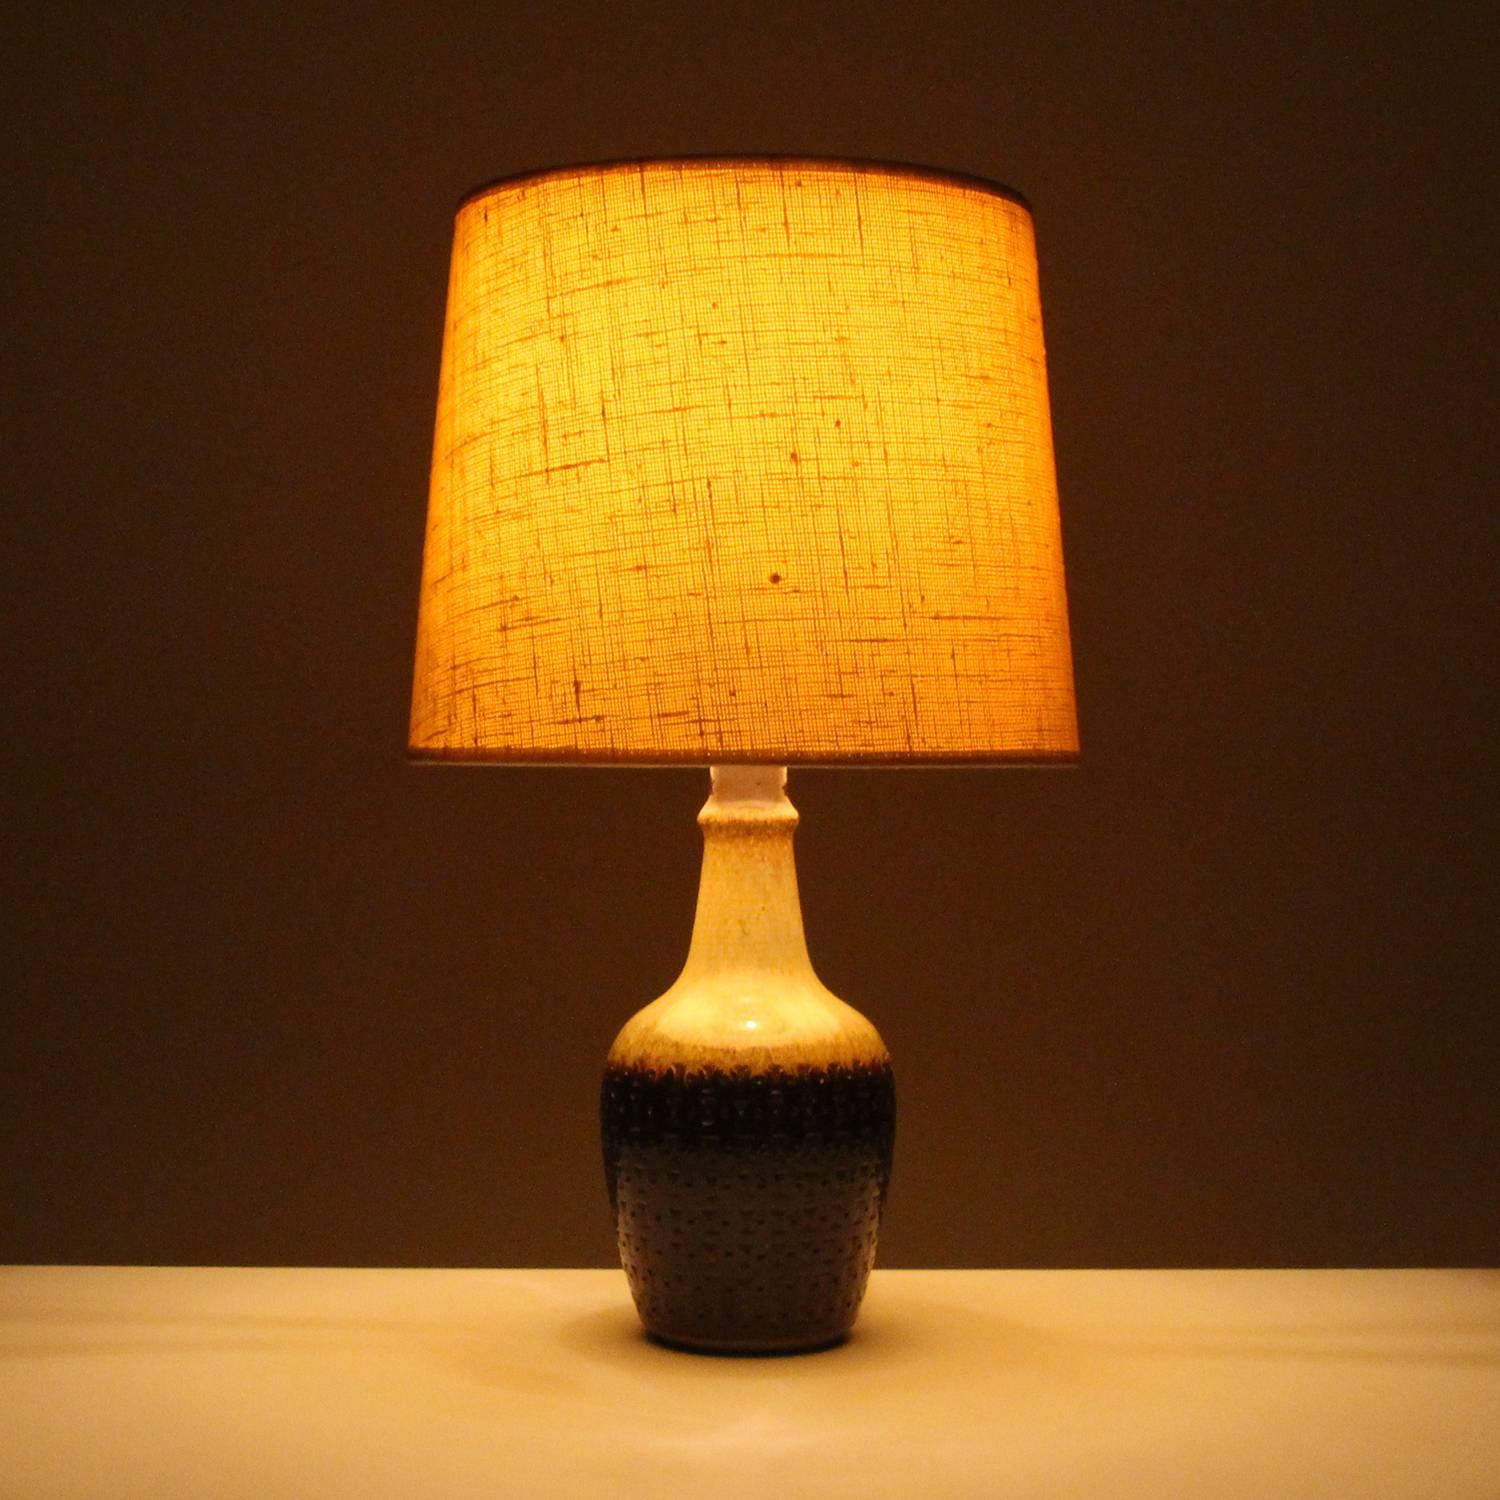 Ceramic table lamp, no. 3025 by Gerd Hiort Petersen for Søholm, Denmark in circa 1960, sand and dark brown glazed ceramic lamp stand with vintage fabric shade included, all in excellent vintage condition.

A beautiful ceramic table lamp with an